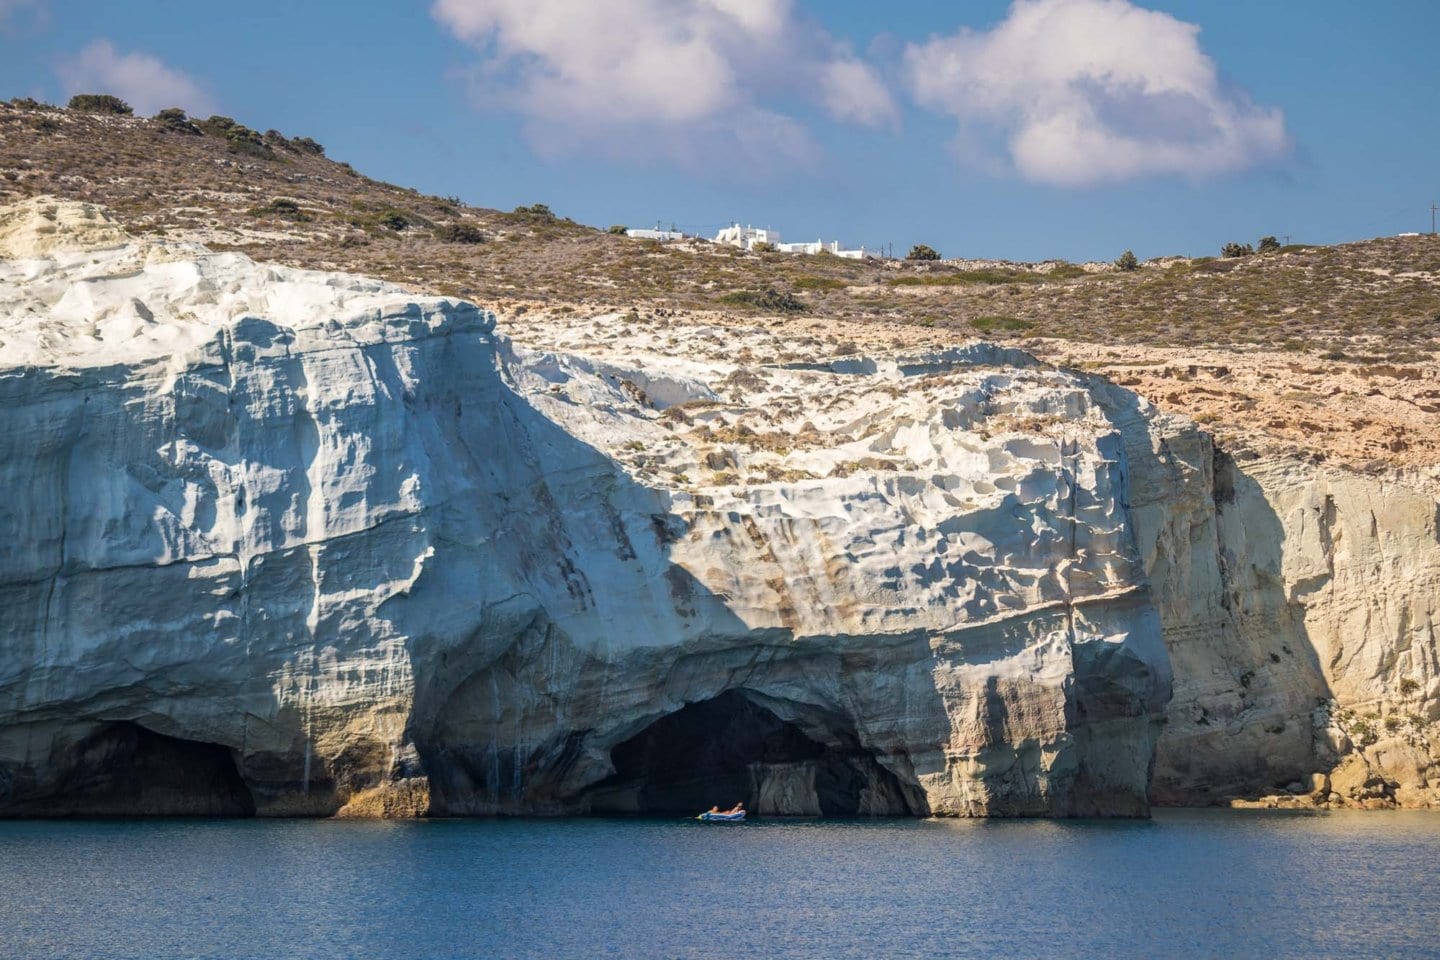 Sarakiniko beach, the most famous beach on Milos island. Seen in passing from a sailing boat.